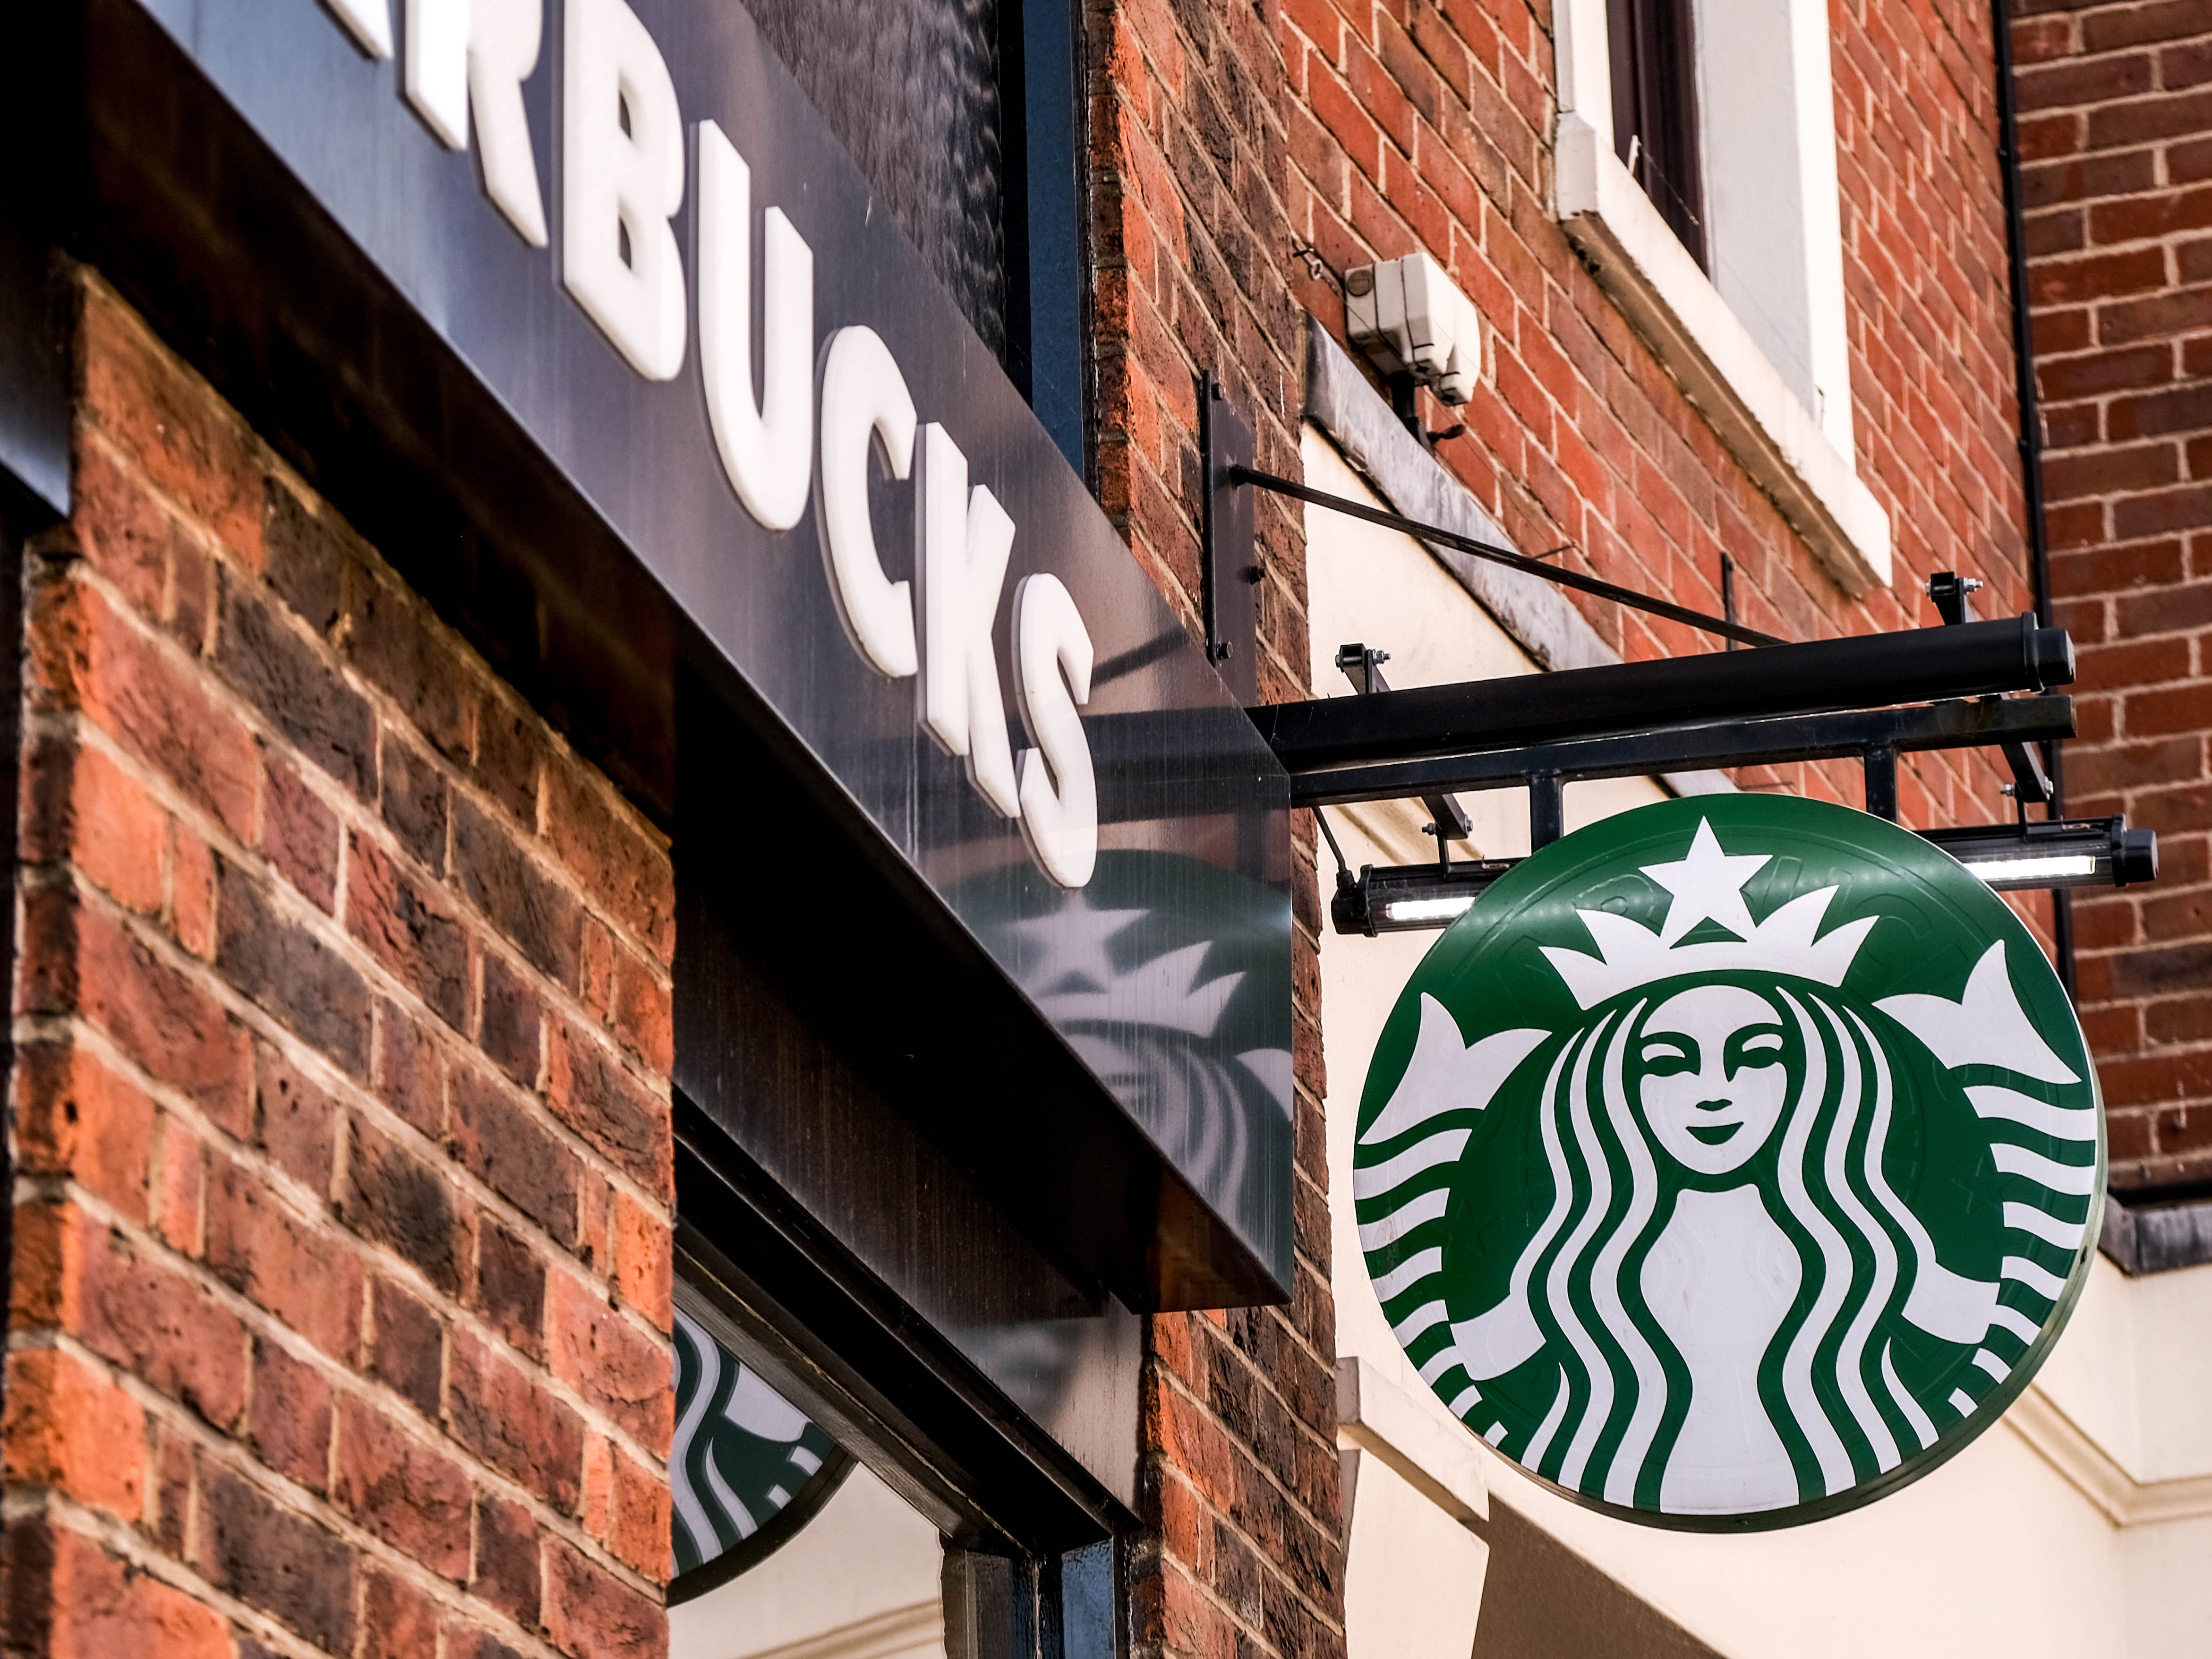 Starbucks, Microsoft, JetBlue, and other companies want to be